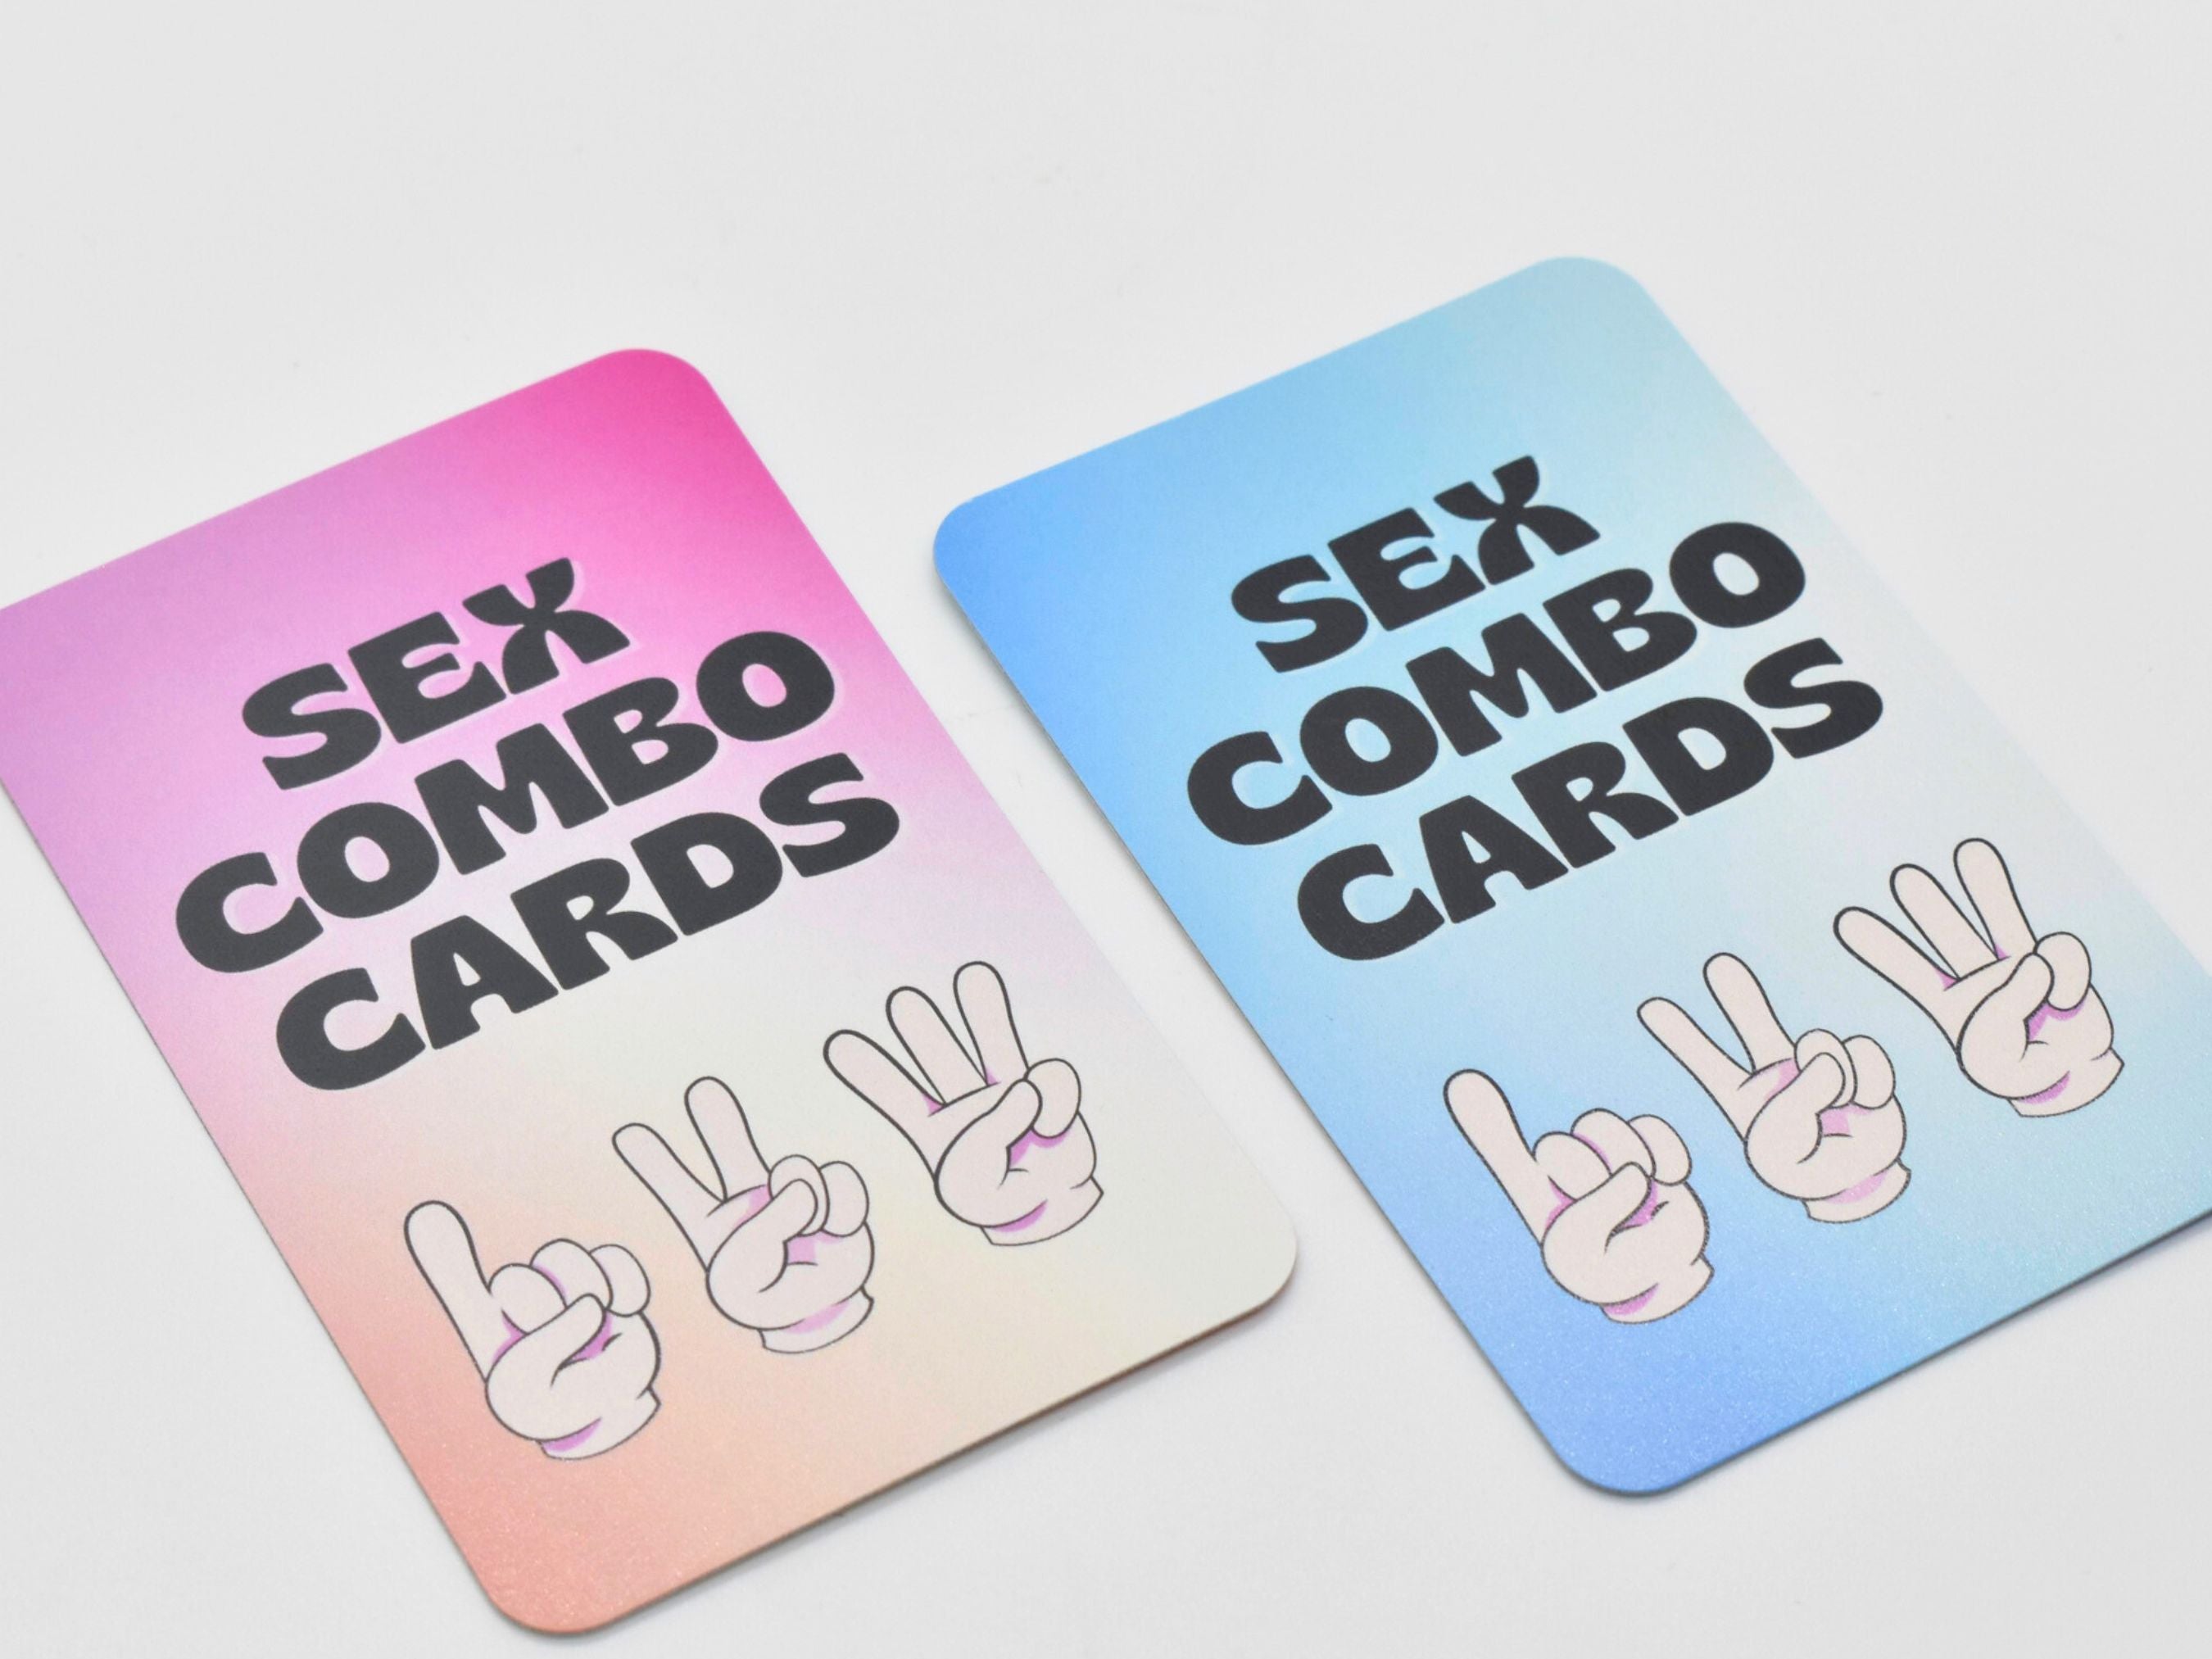 Sex Combo Cards